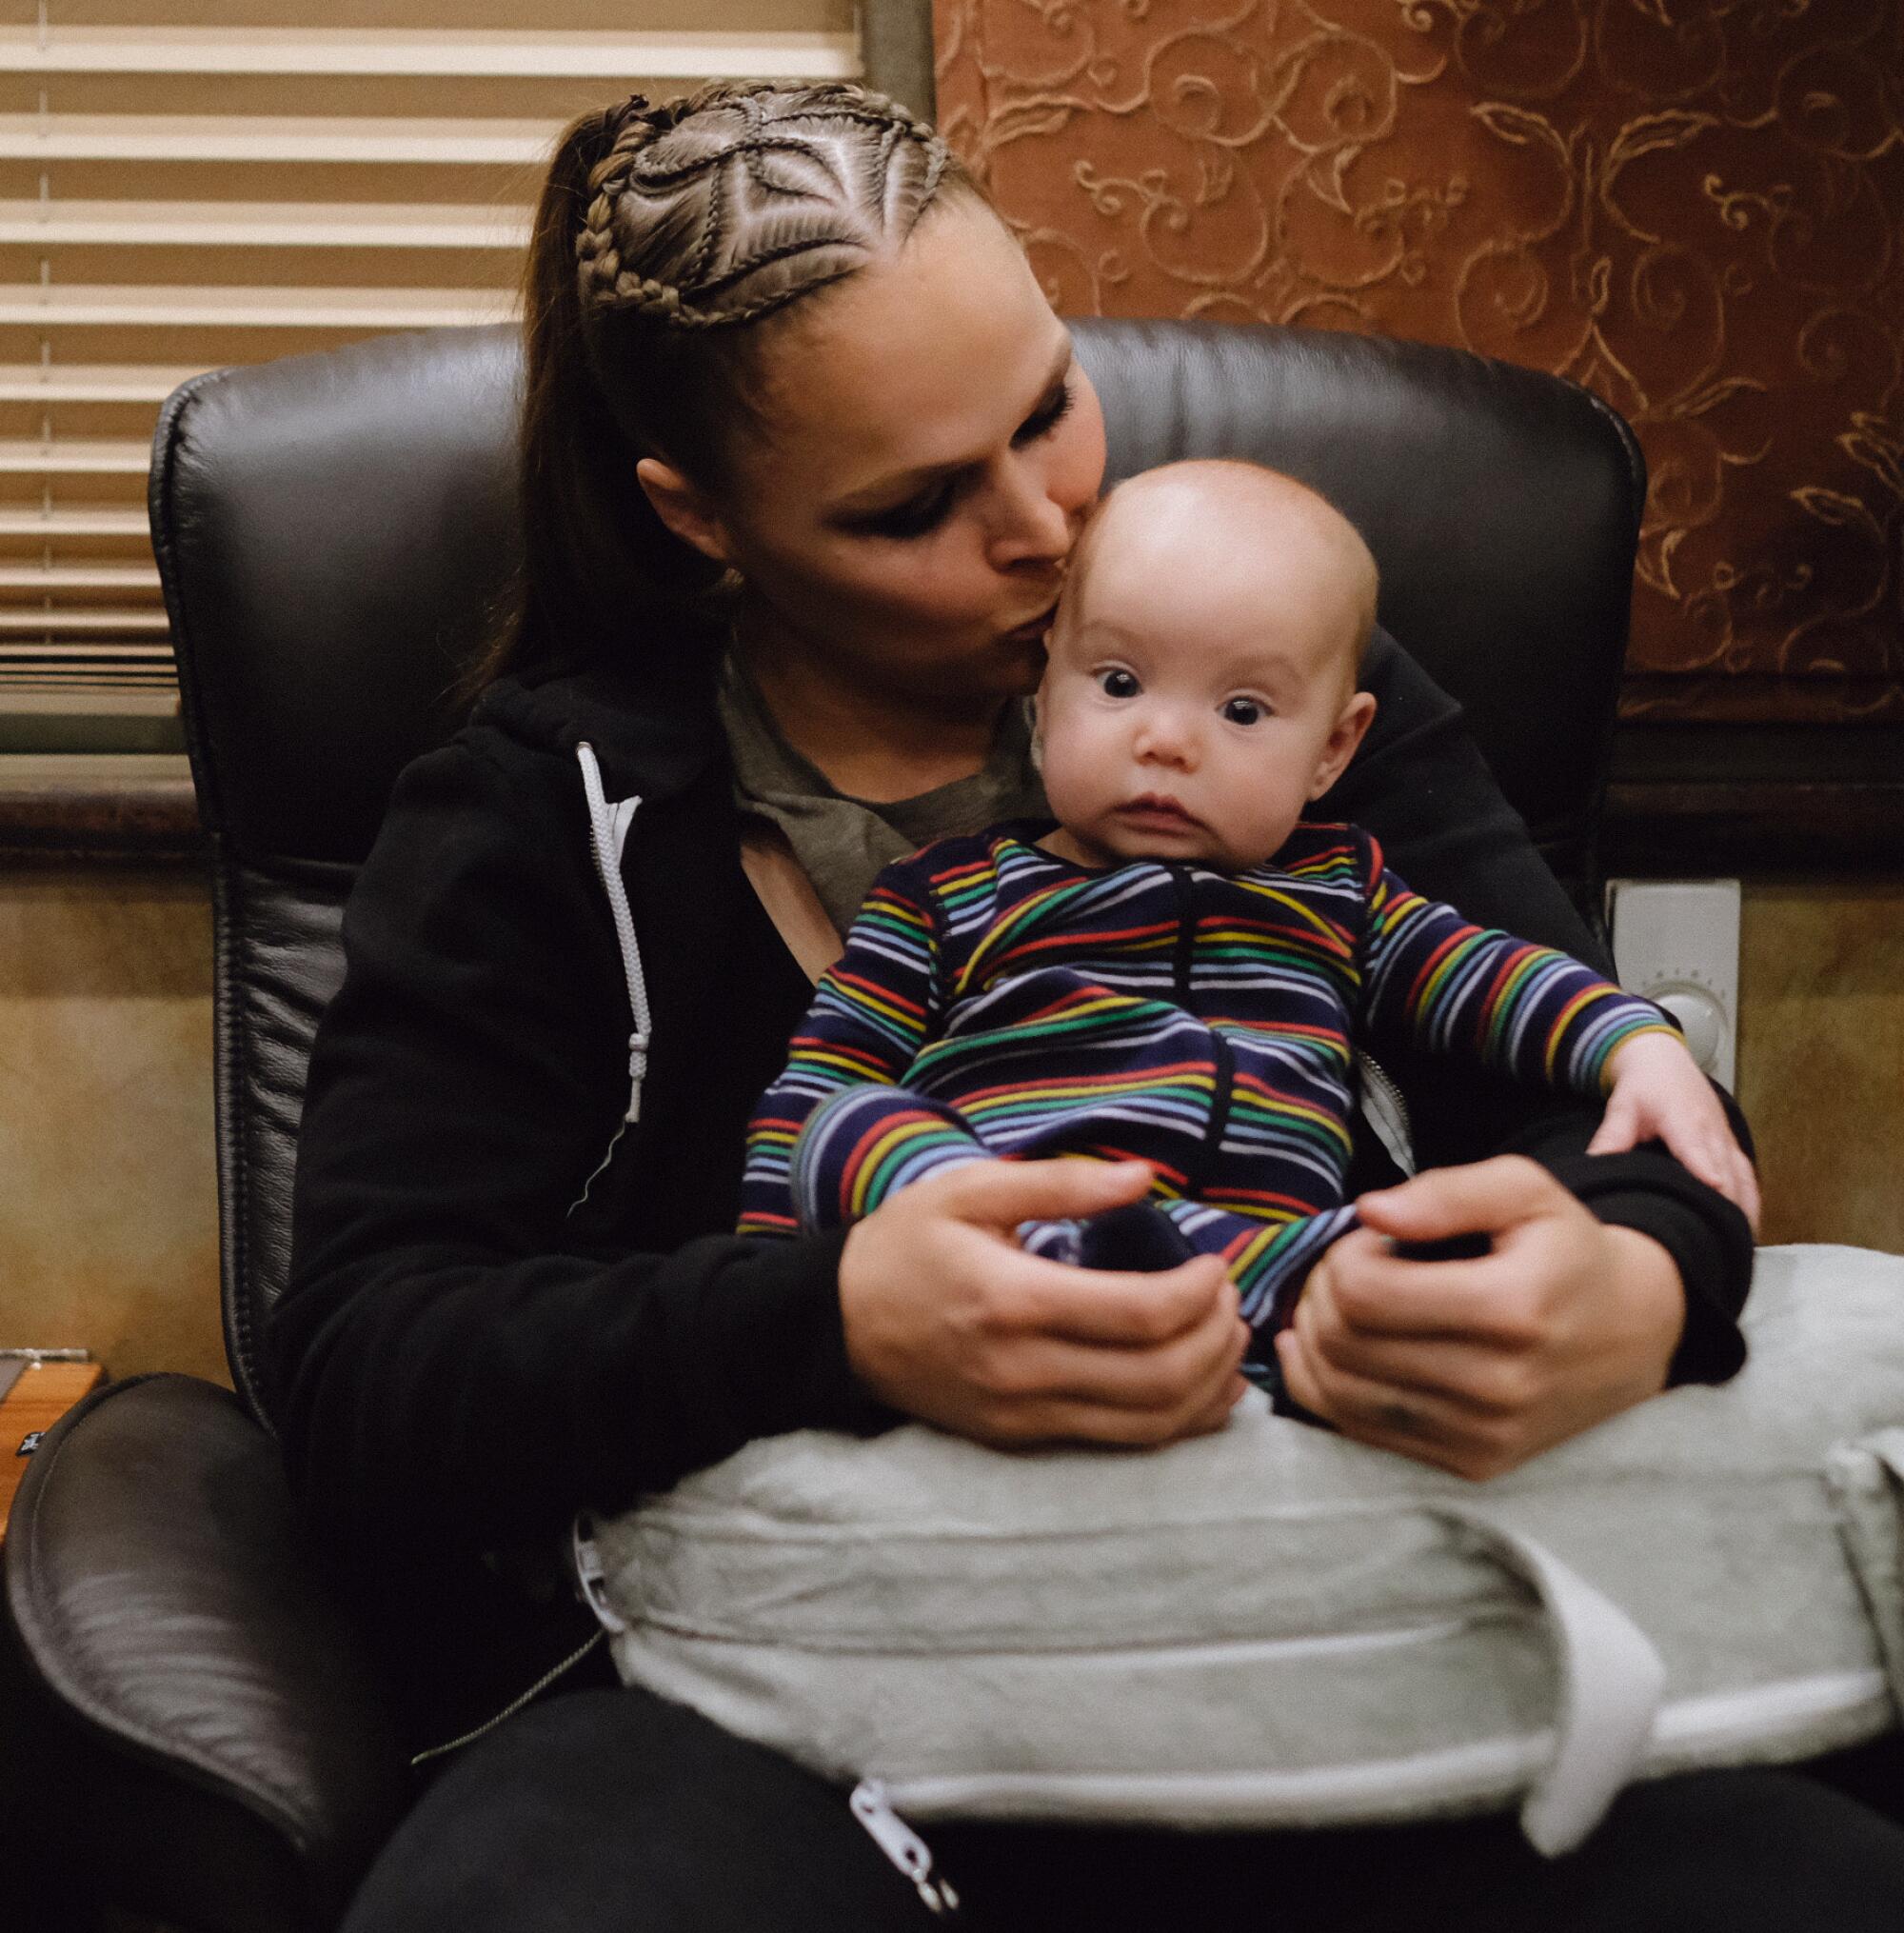 Ronda Rousey kisses the head of daughter La’akea Browne, who is sitting in her mother's lap.